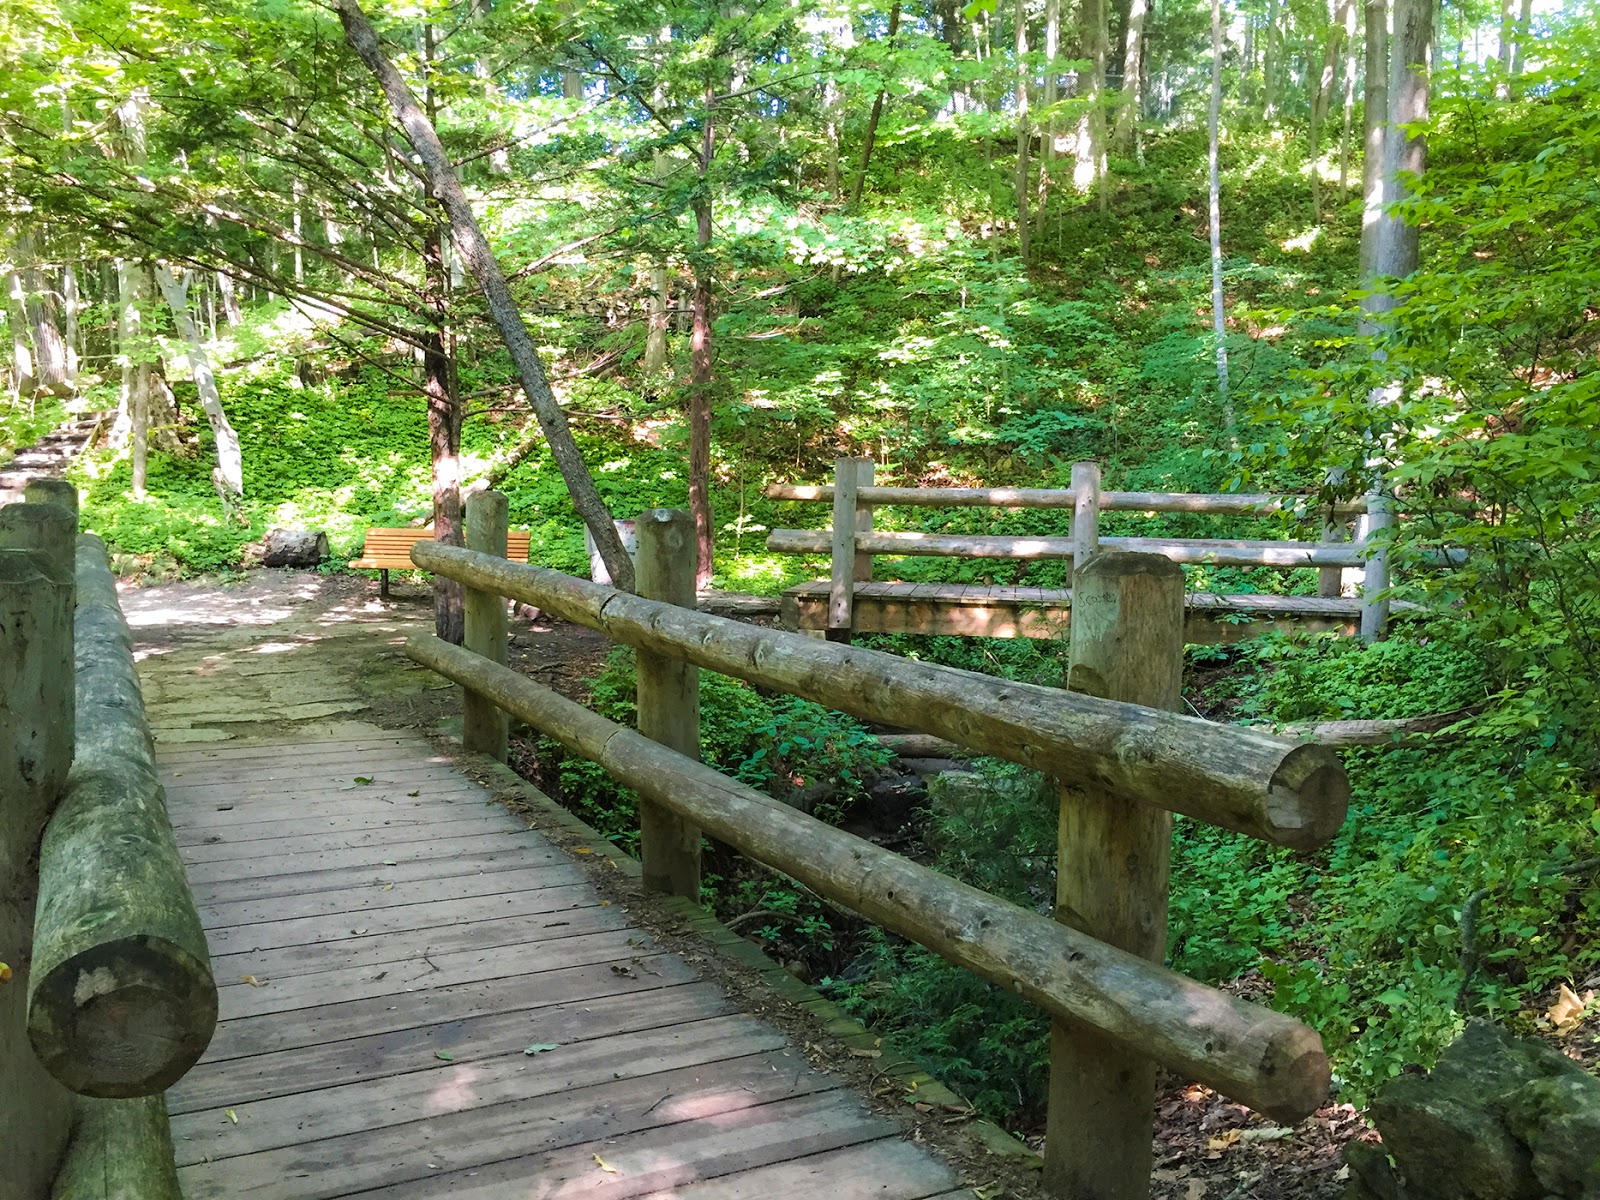 Wisconsin Explorer: Hiking the Seven Bridges Trail in South Milwaukee